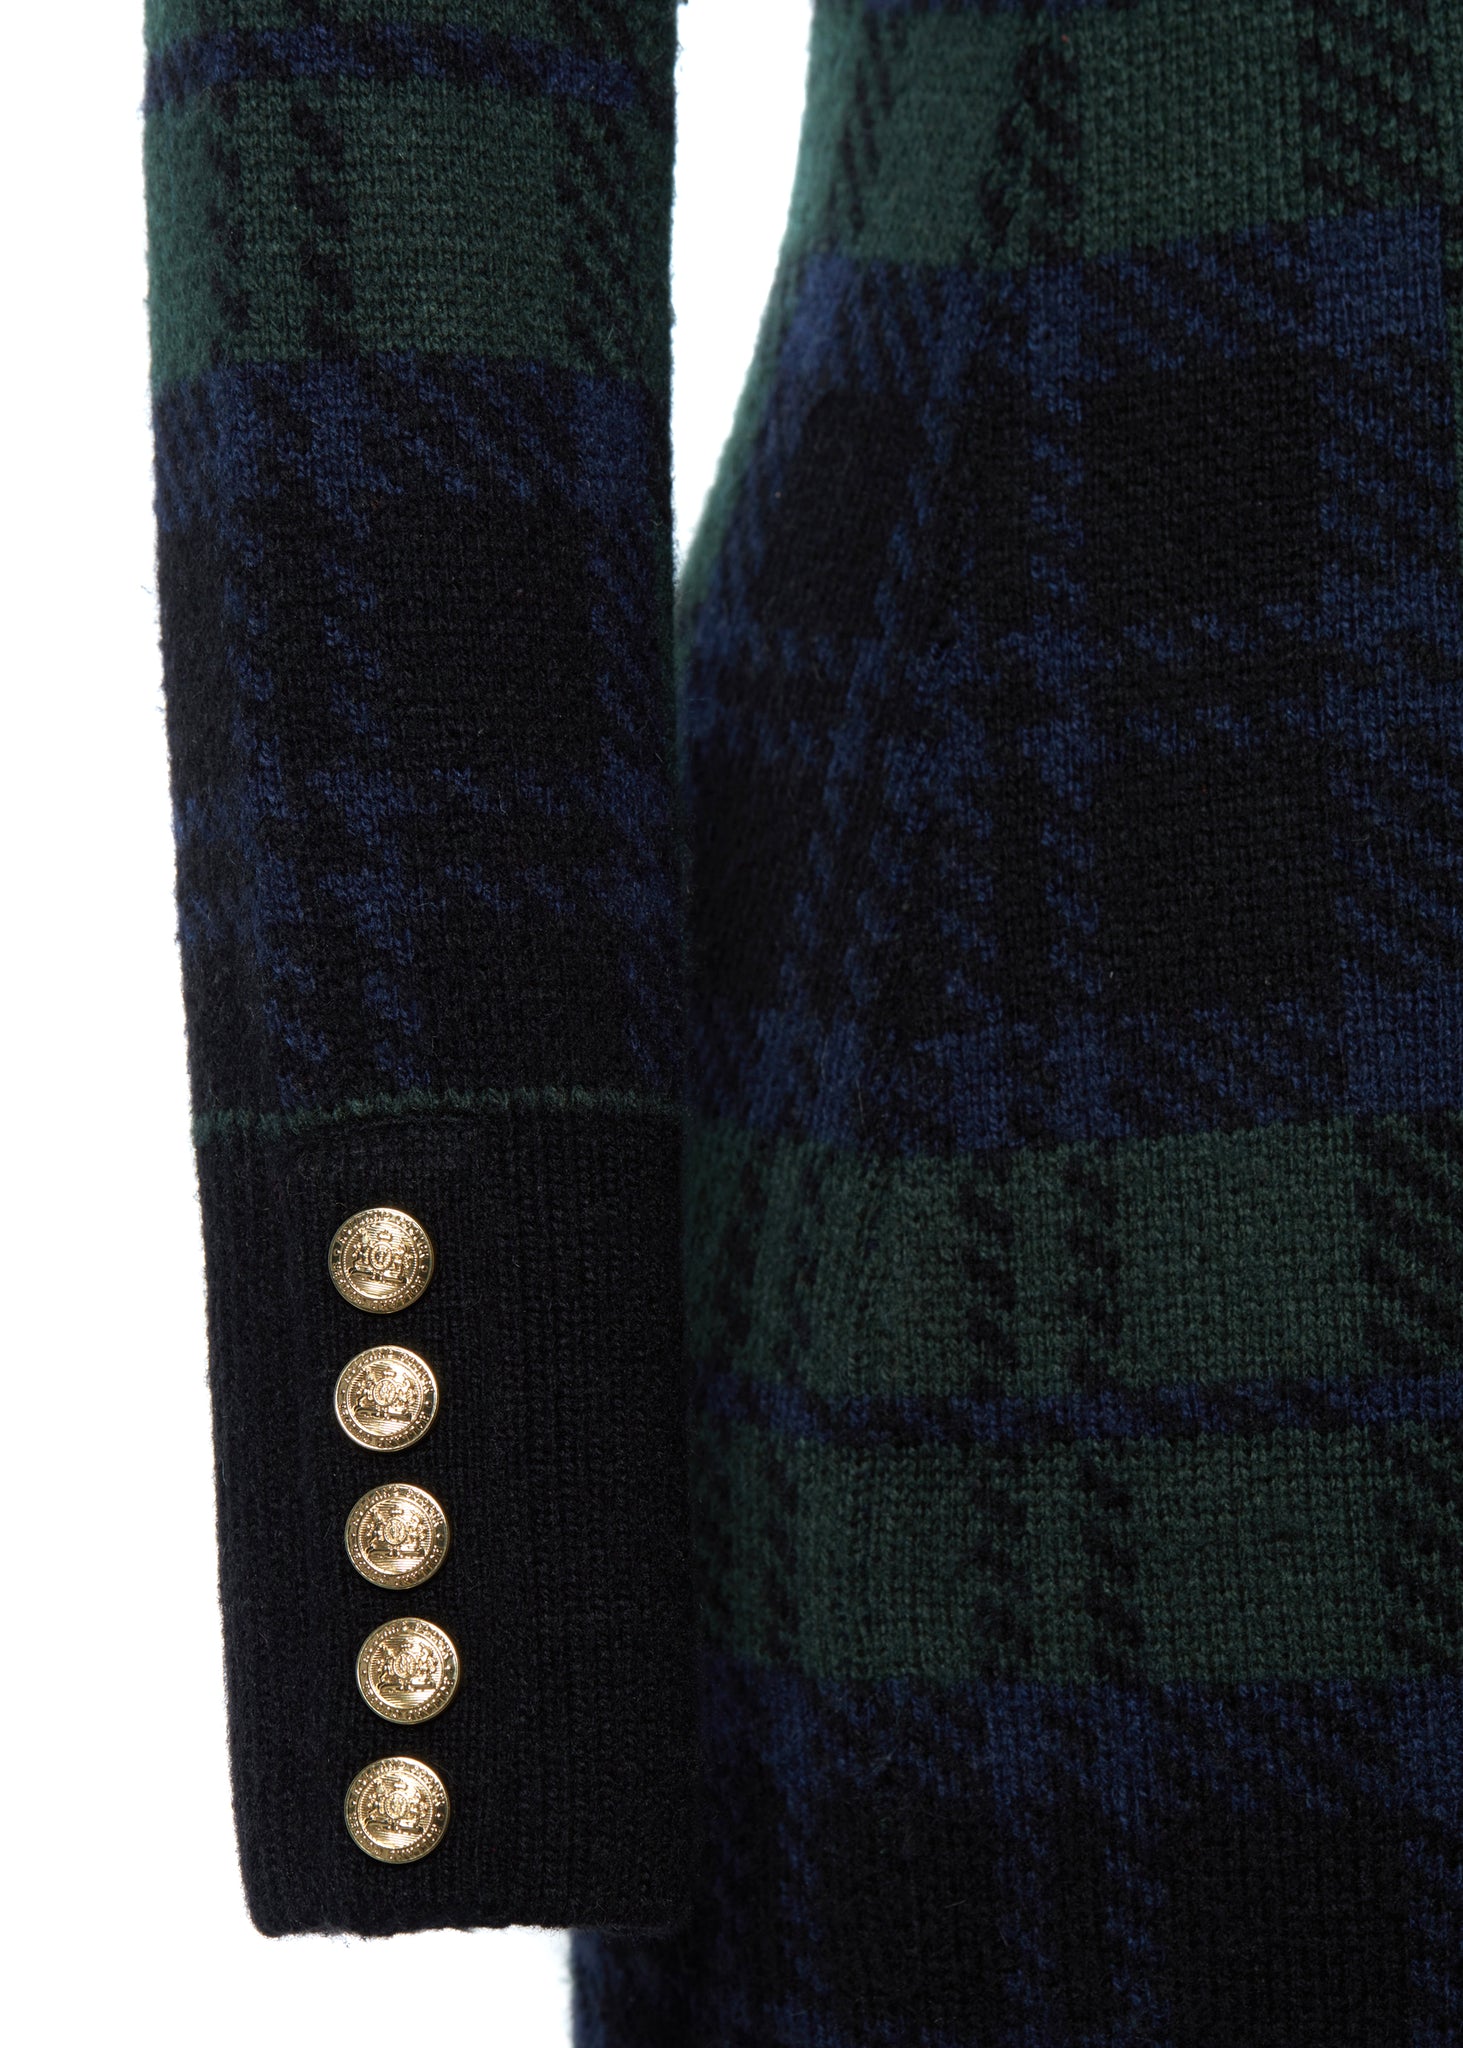 gold detail of cuff of womens green navy and black blackwatch roll neck jumper dress with contrast black cuffs and ribbed hem 